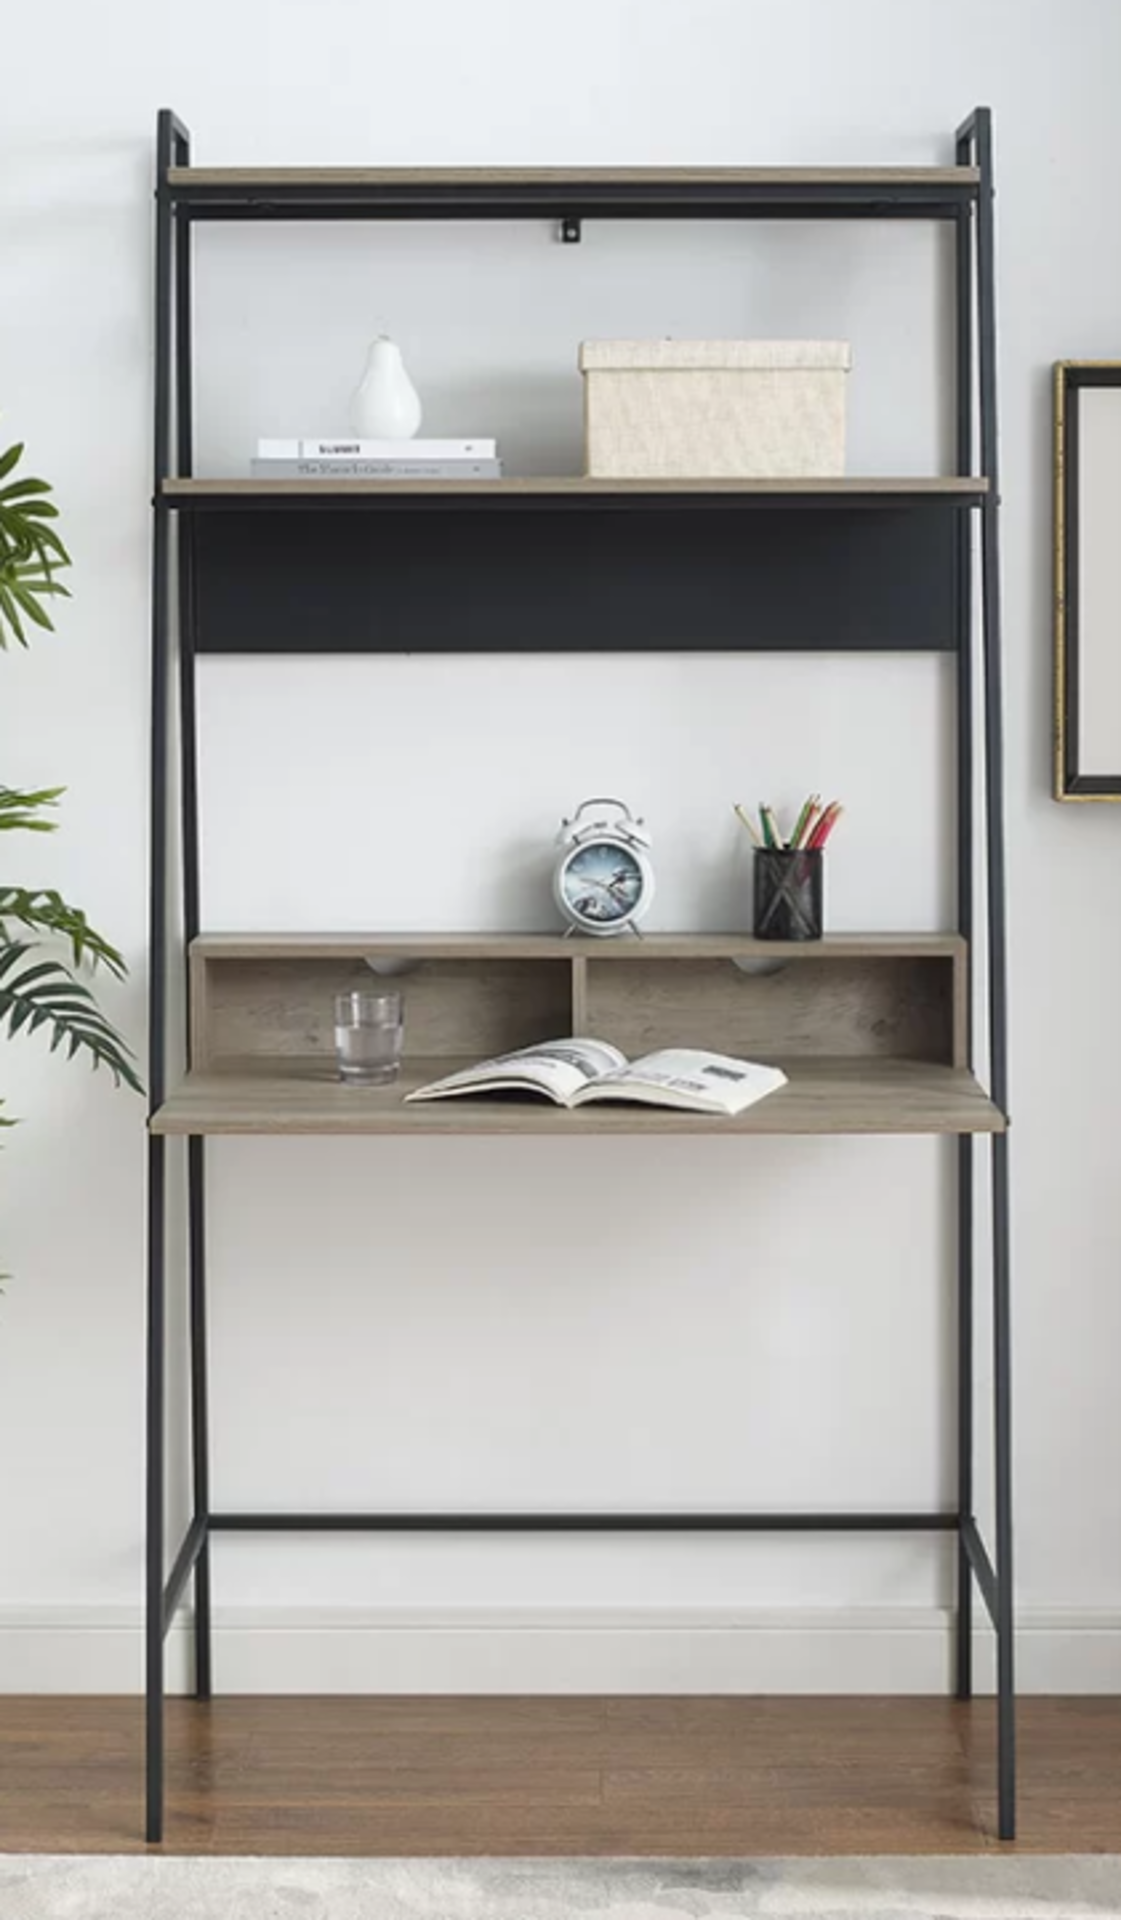 Walburg Ladder Desk. RRP £229.99. Work in style at this ladder desk, which is brimming with urban